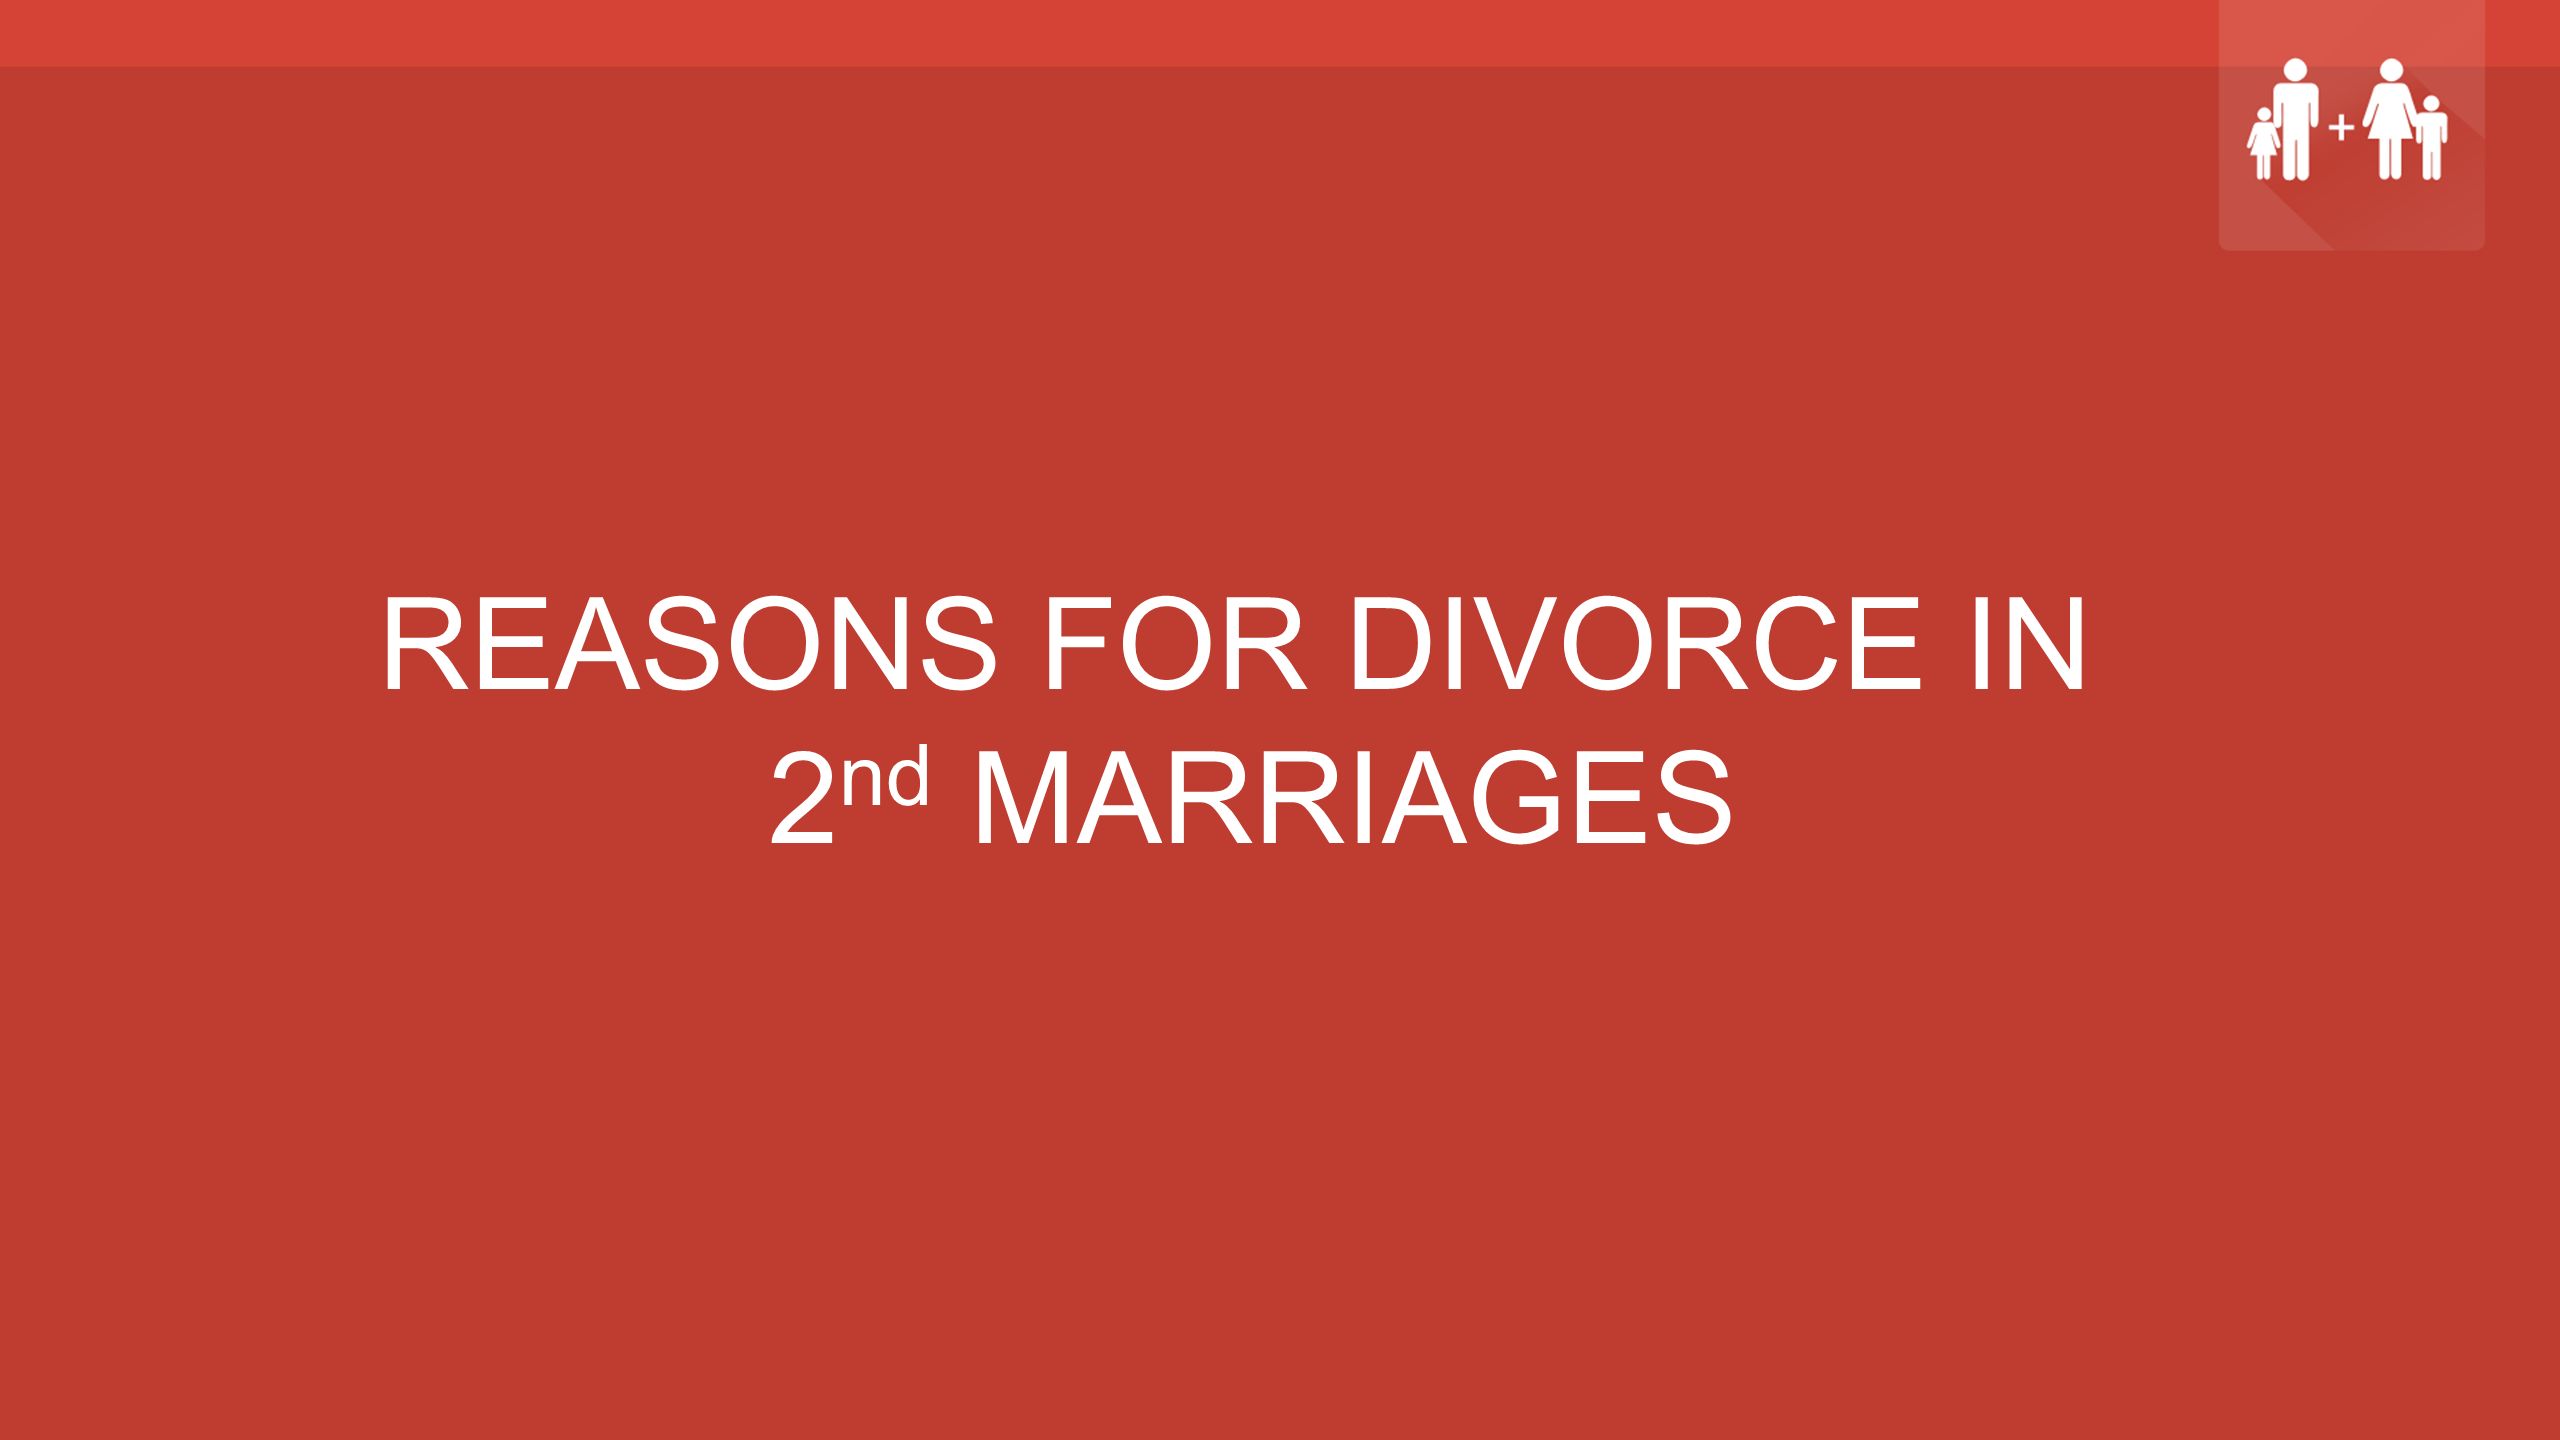 REASONS FOR DIVORCE IN 2 nd MARRIAGES